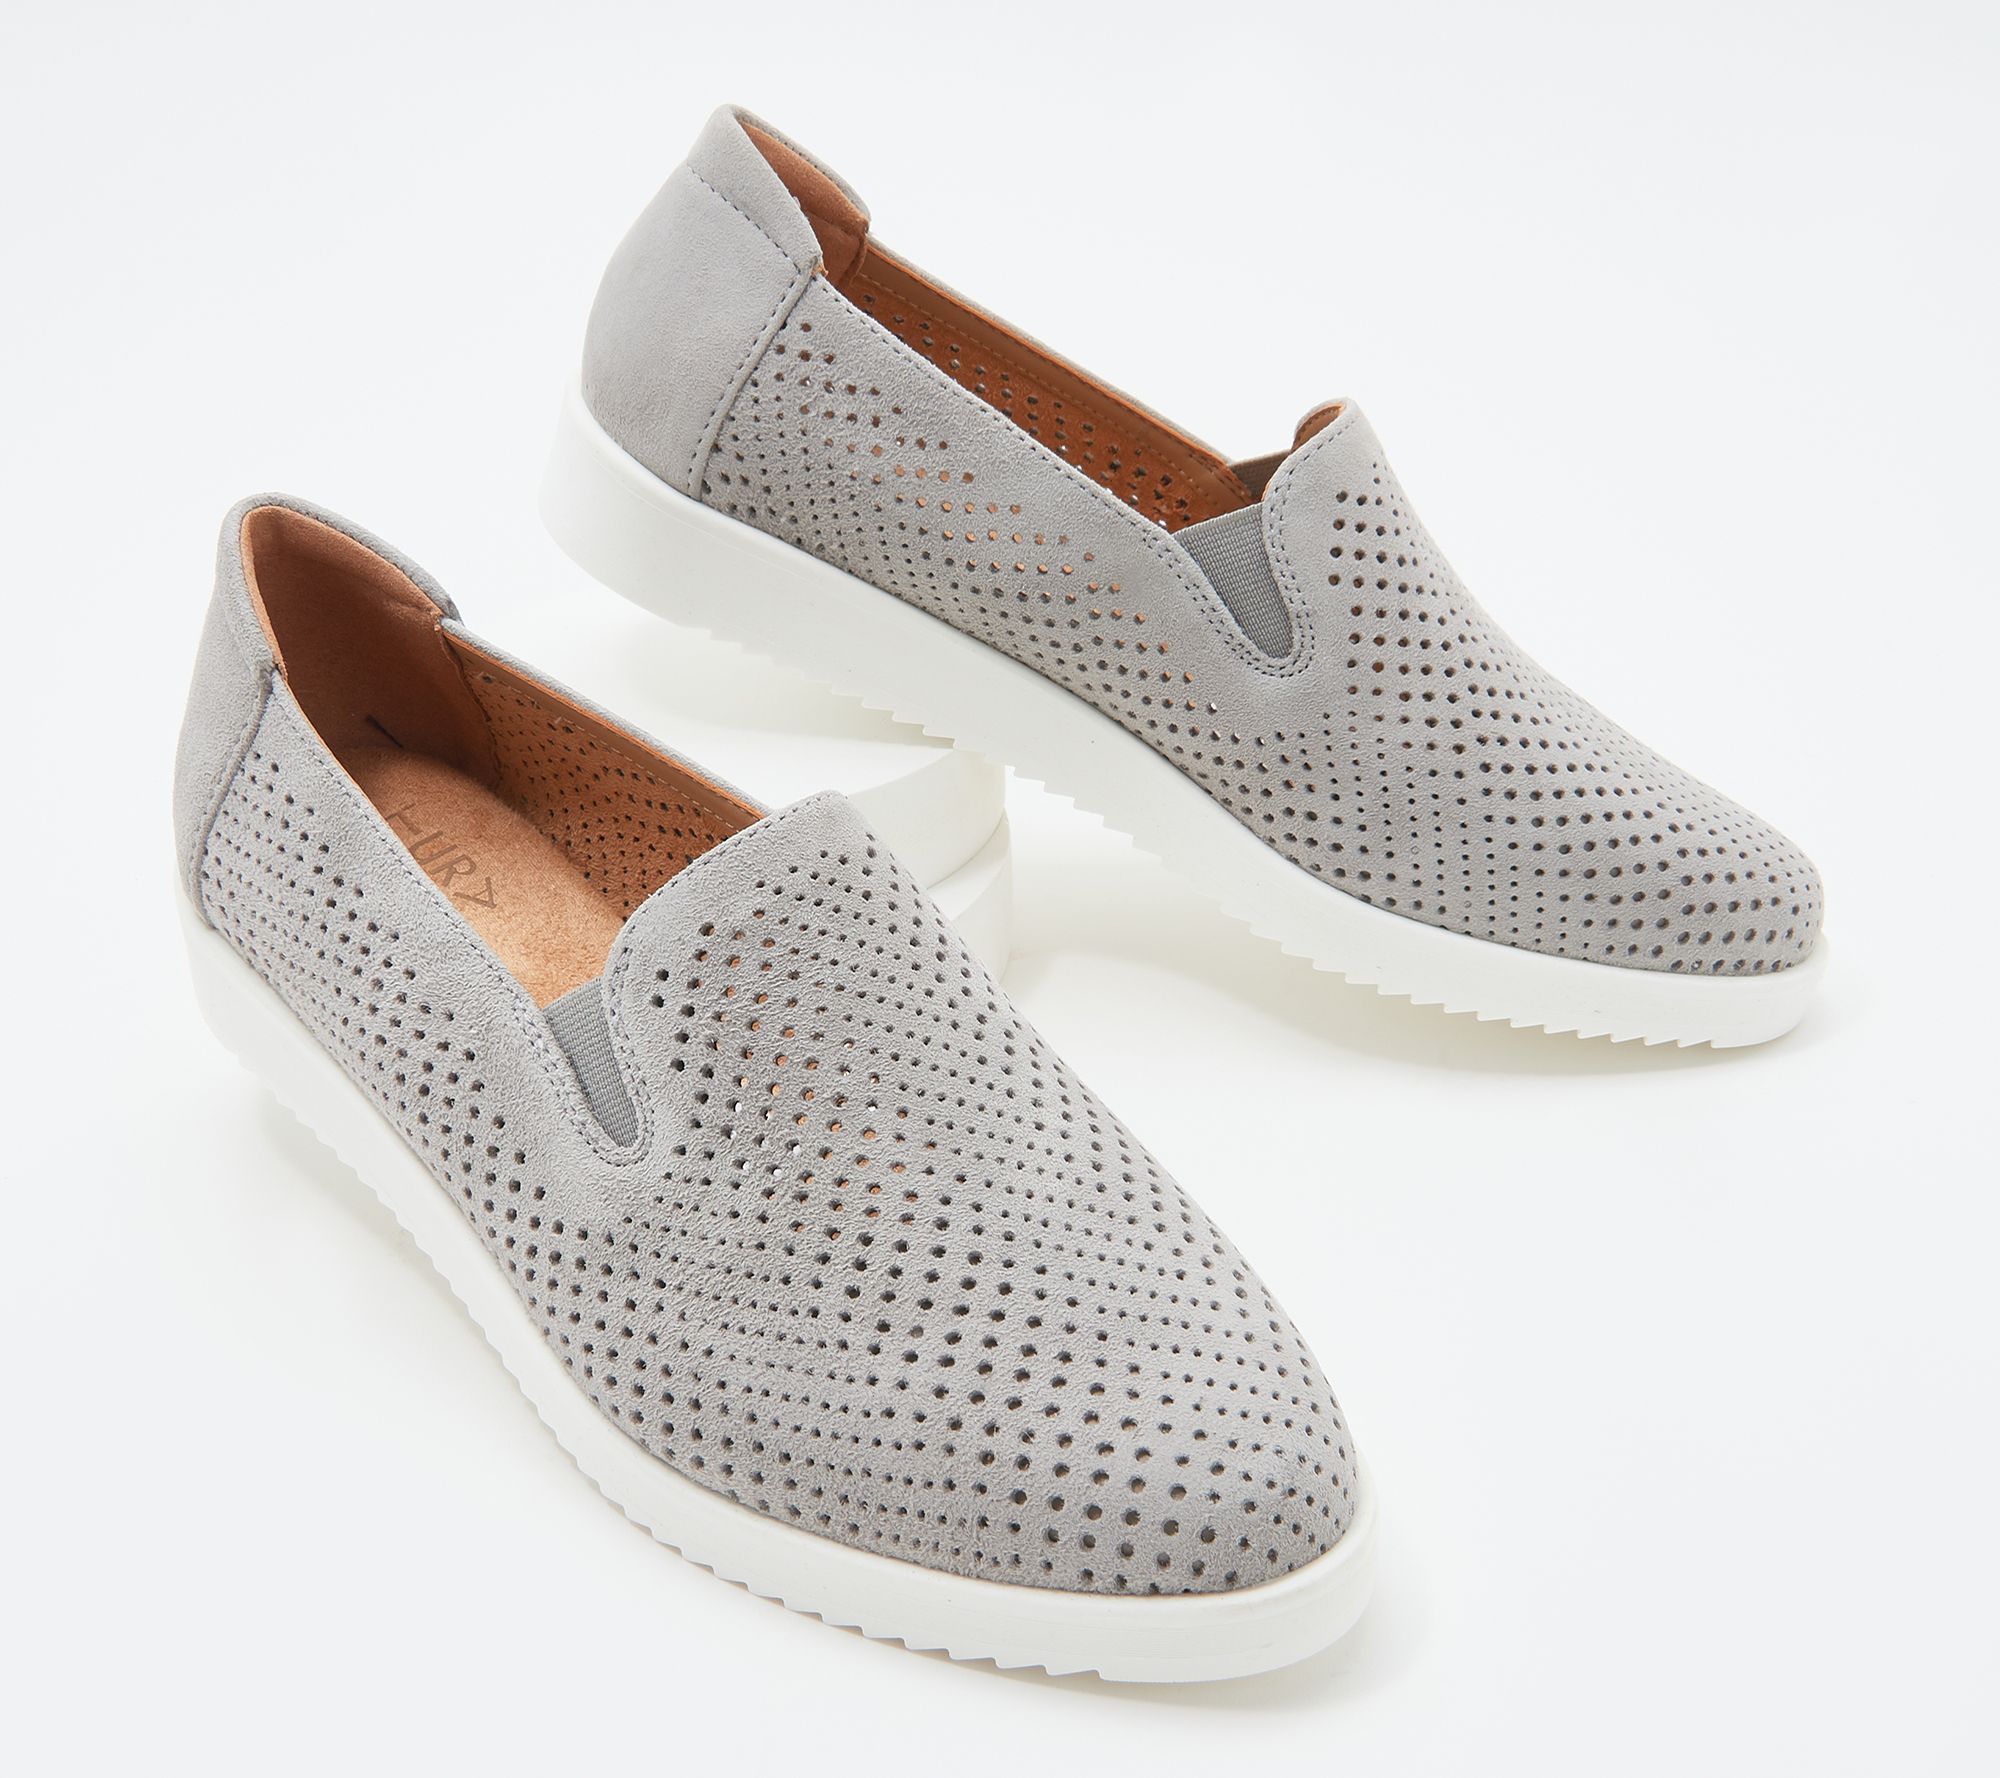 naturalizer slip on loafers